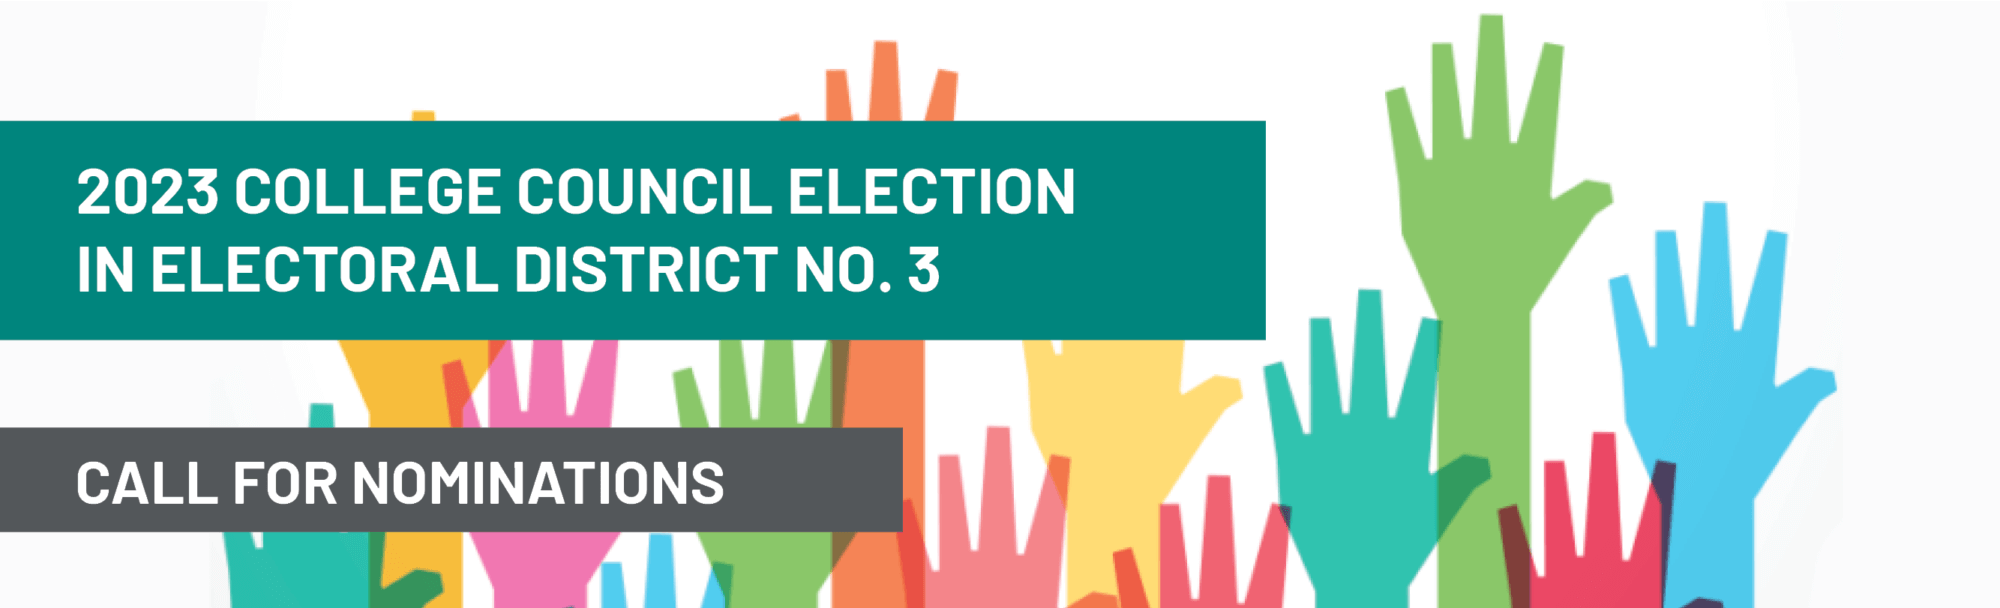 2023 College Council Election for Electoral District No. 3 - Call for Nominations